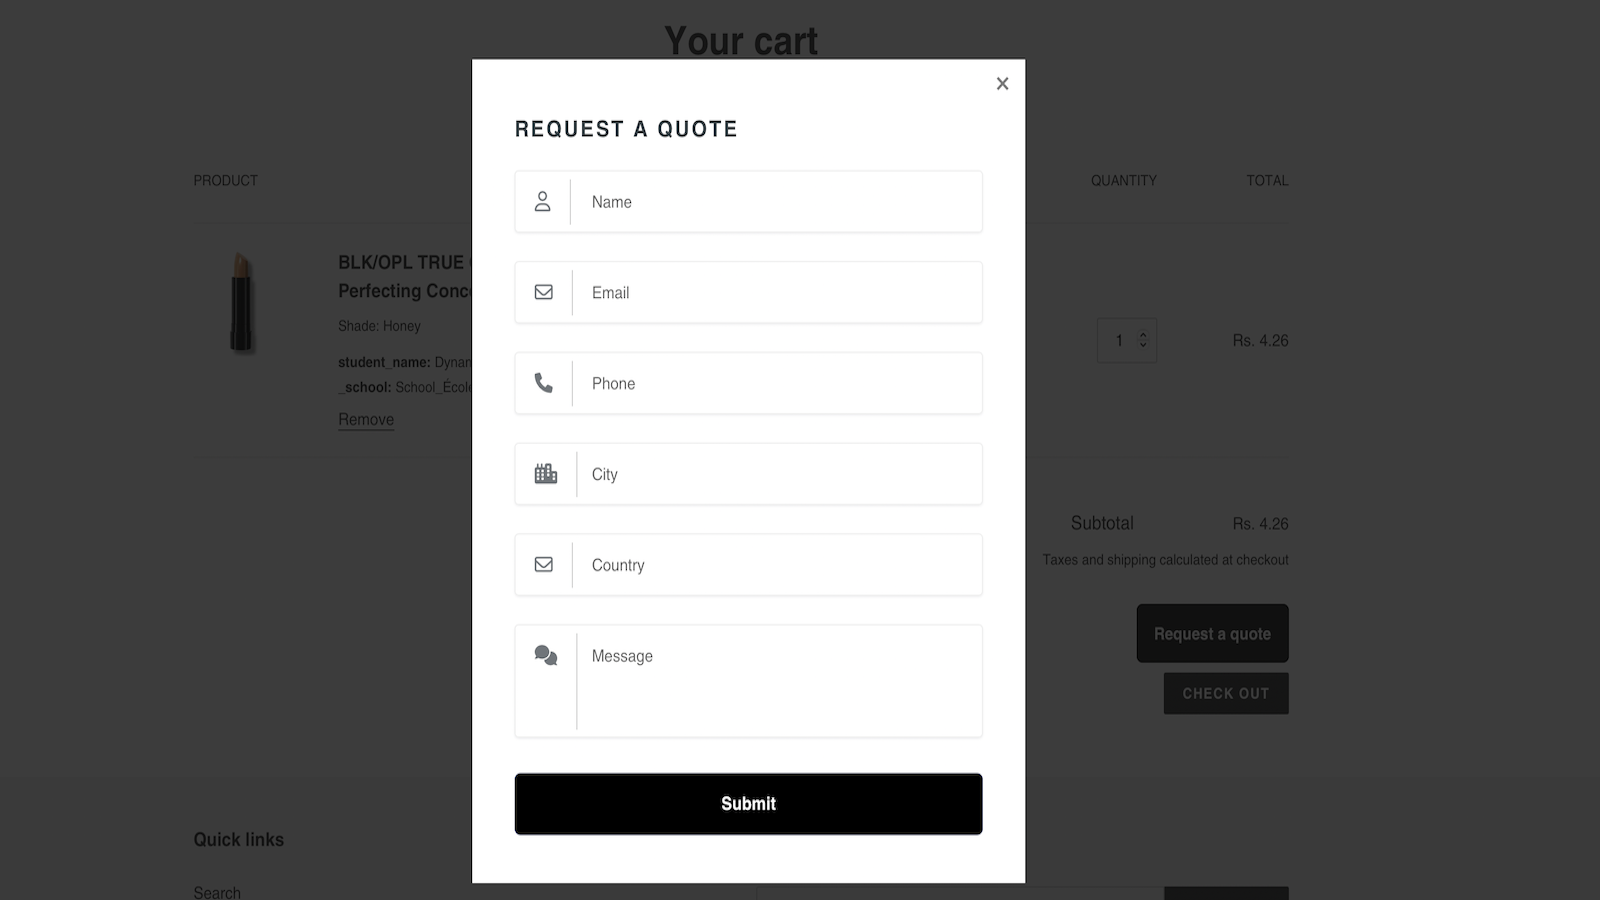 Request a quote option on cart page to get bulk inquiry lead